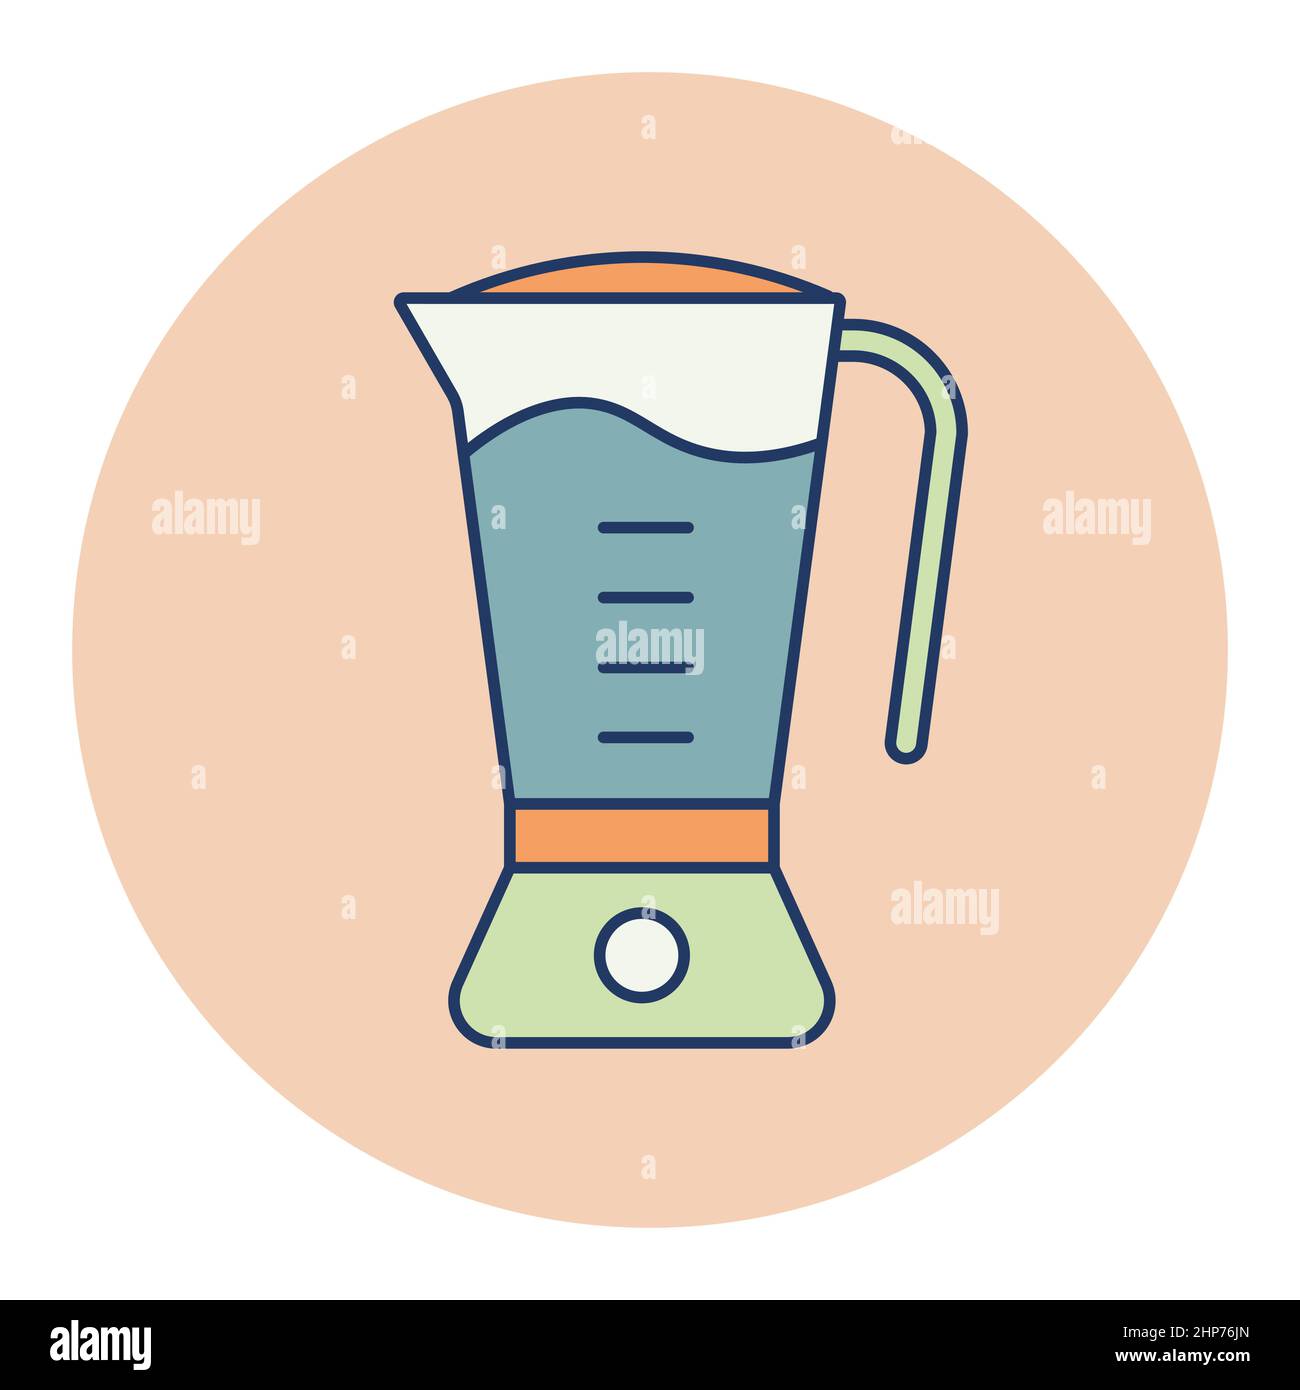 Electric blender vector icon. Kitchen appliance Stock Vector